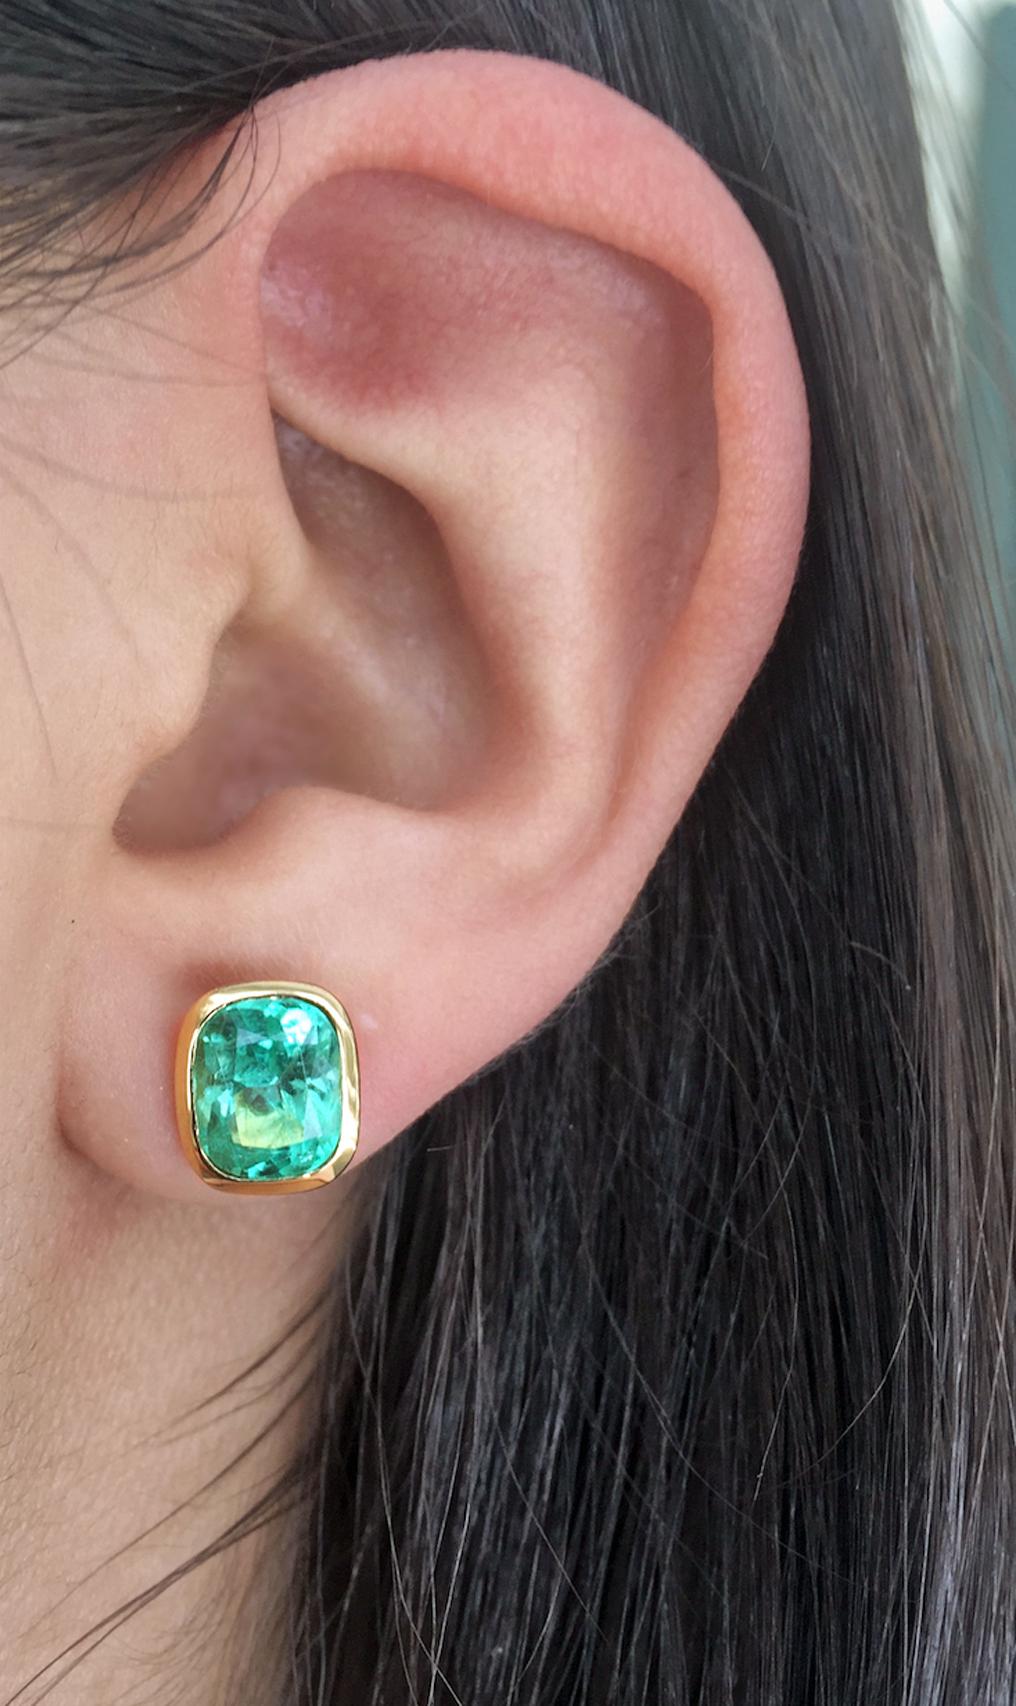 Exclusive Cushion Colombian Emerald Stud Earrings 18k Yellow Gold
Primary Stones: 100% Natural Colombian Emeralds
Shape or Cut : Cushion Cut
Average Color/Clarity : AAA Medium Light Green/ Clarity, VS
Total Weight Emeralds: 3.67 Carats
Style: Studs/